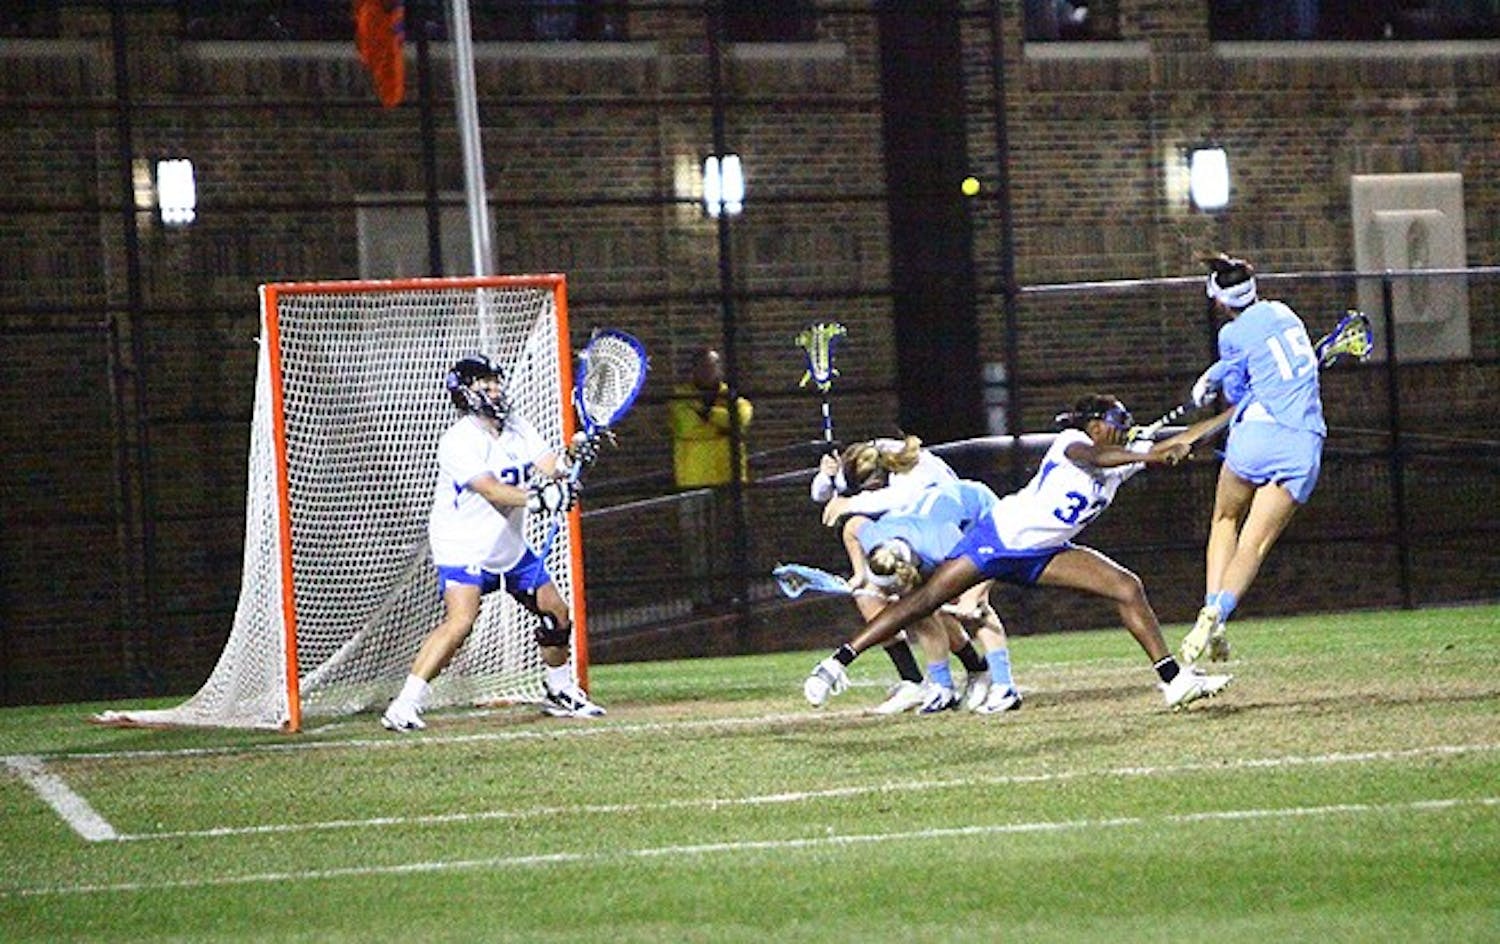 Duke goalkeeper Kelsey Duryea will have to defend an OSU offense that averages 12.9 goals per game.